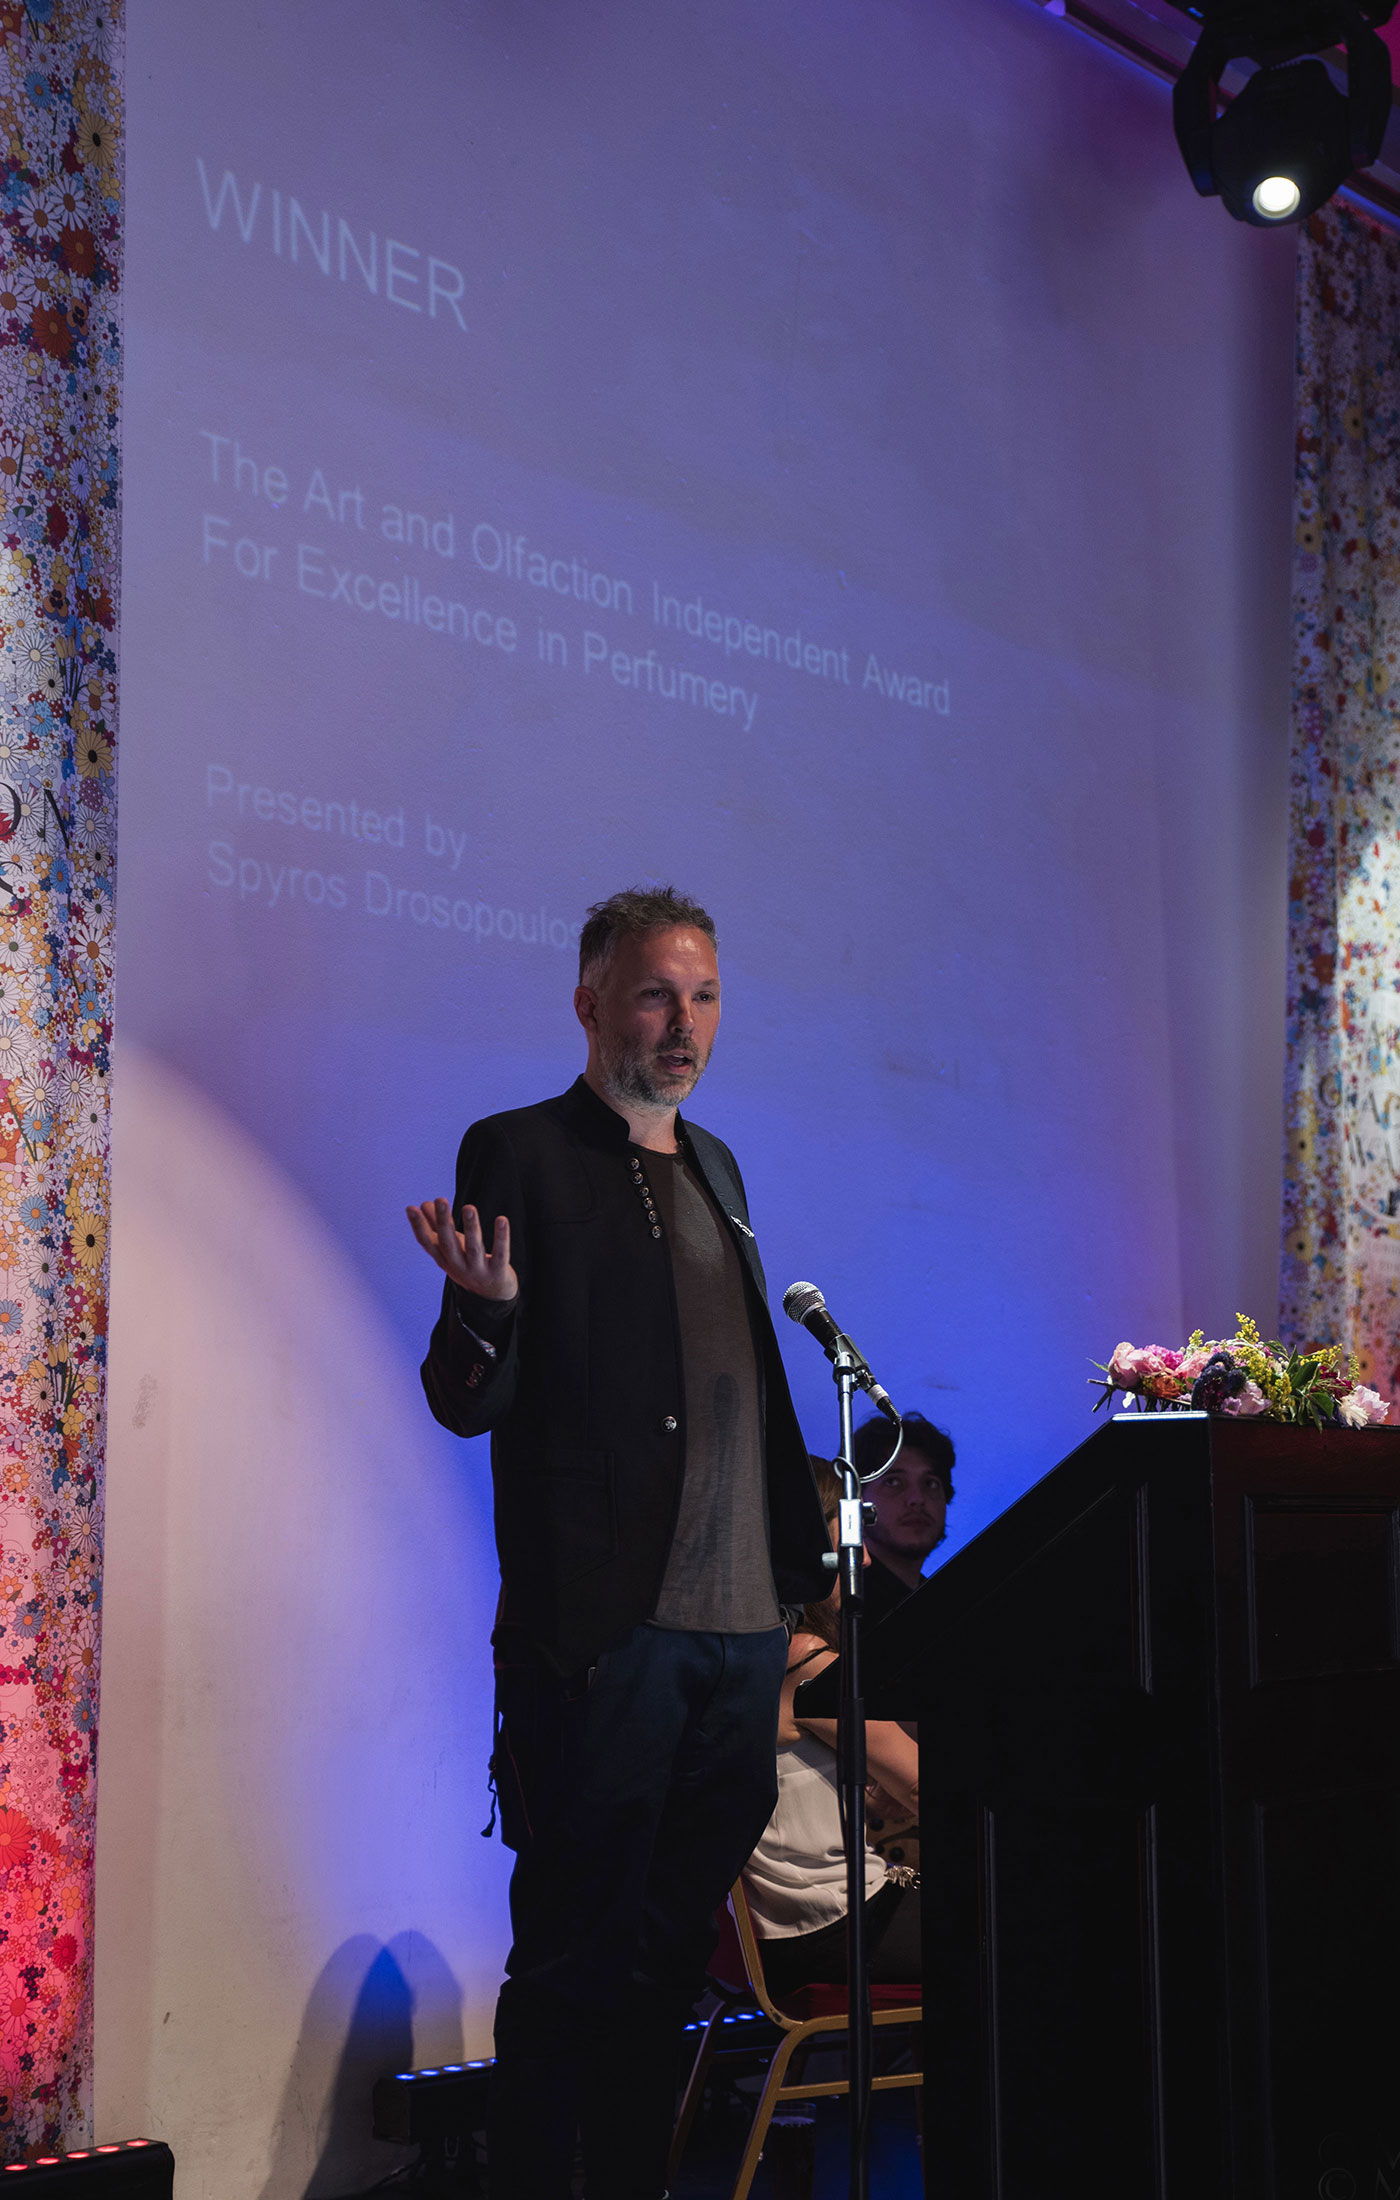 Spyros Drosopoulos at The Art and Olfaction Awards, Photo by Marina Chichi